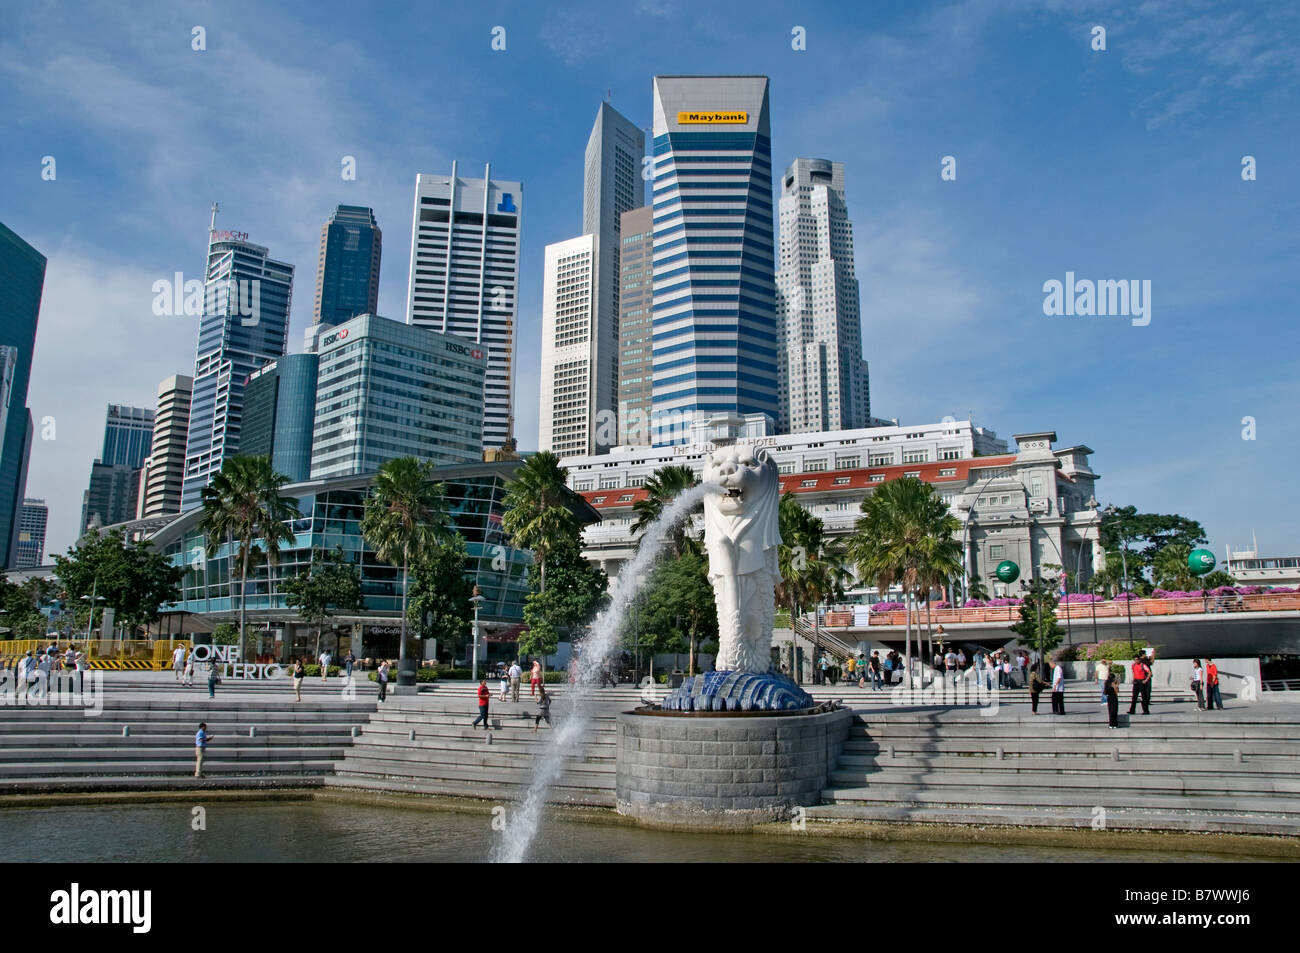 Merlionpark Marina bay half sea lion statue water fountain background Raffles Place CBD financial bank commercial centre Stock Photo